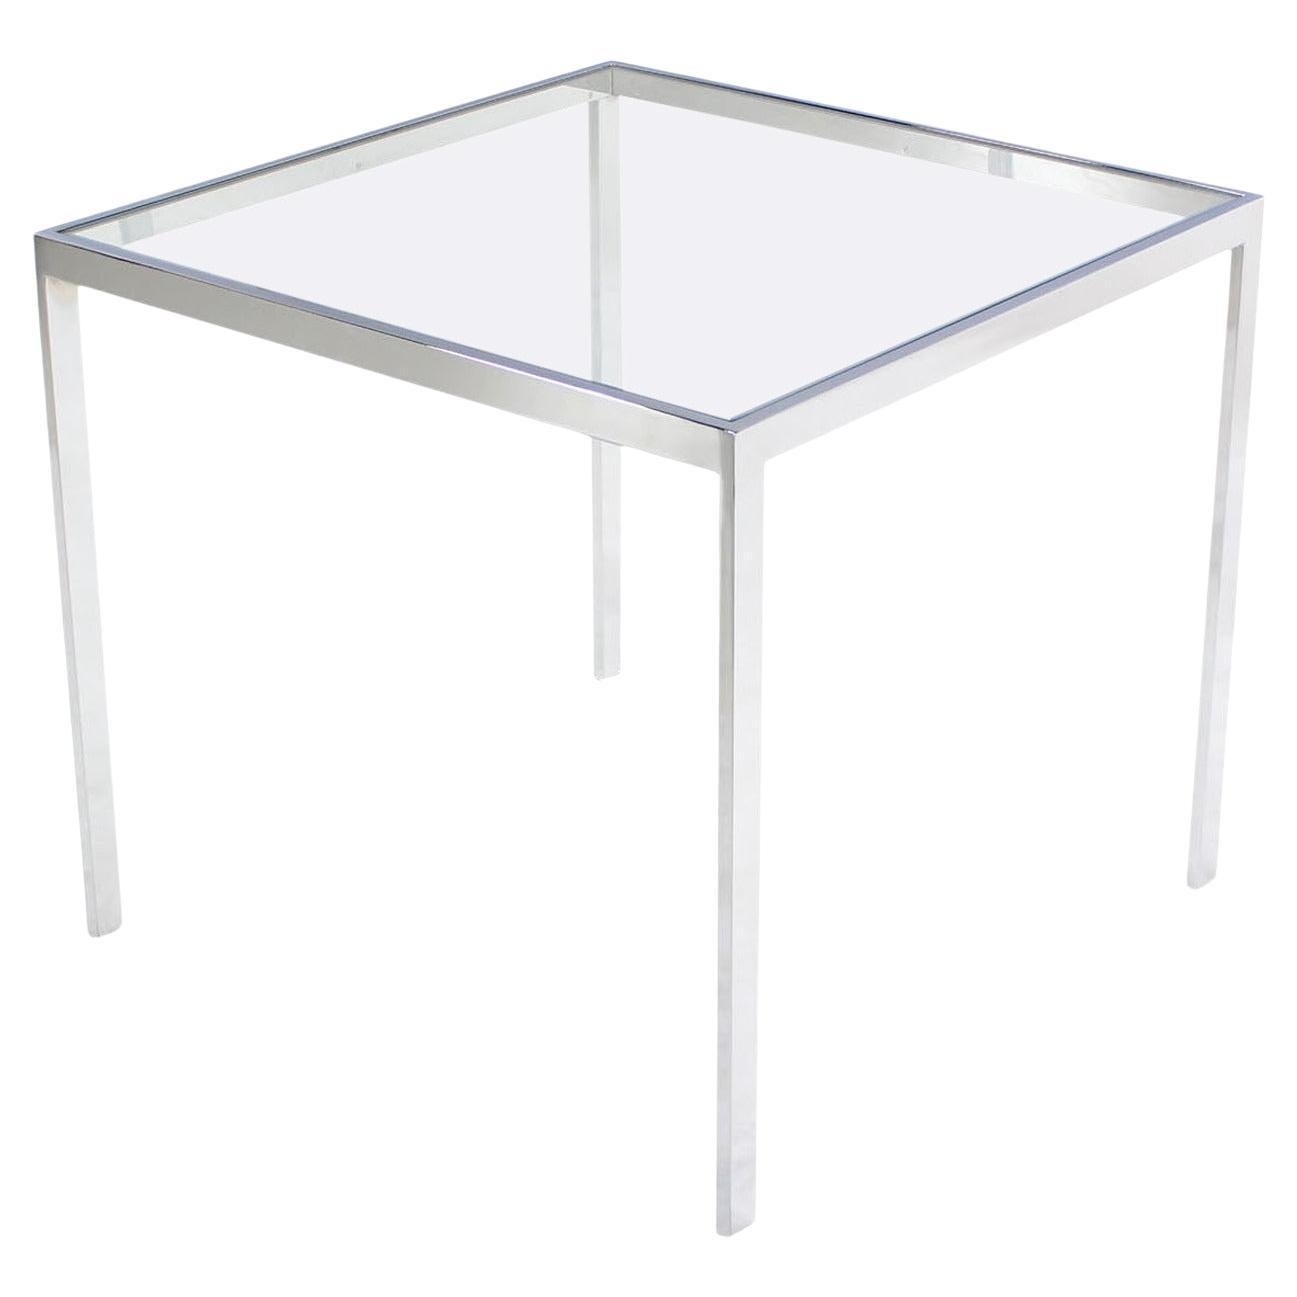 Square Cube Chrome Glass Top Game Small Dinning Dinette Table Bauhaus MINT For Sale